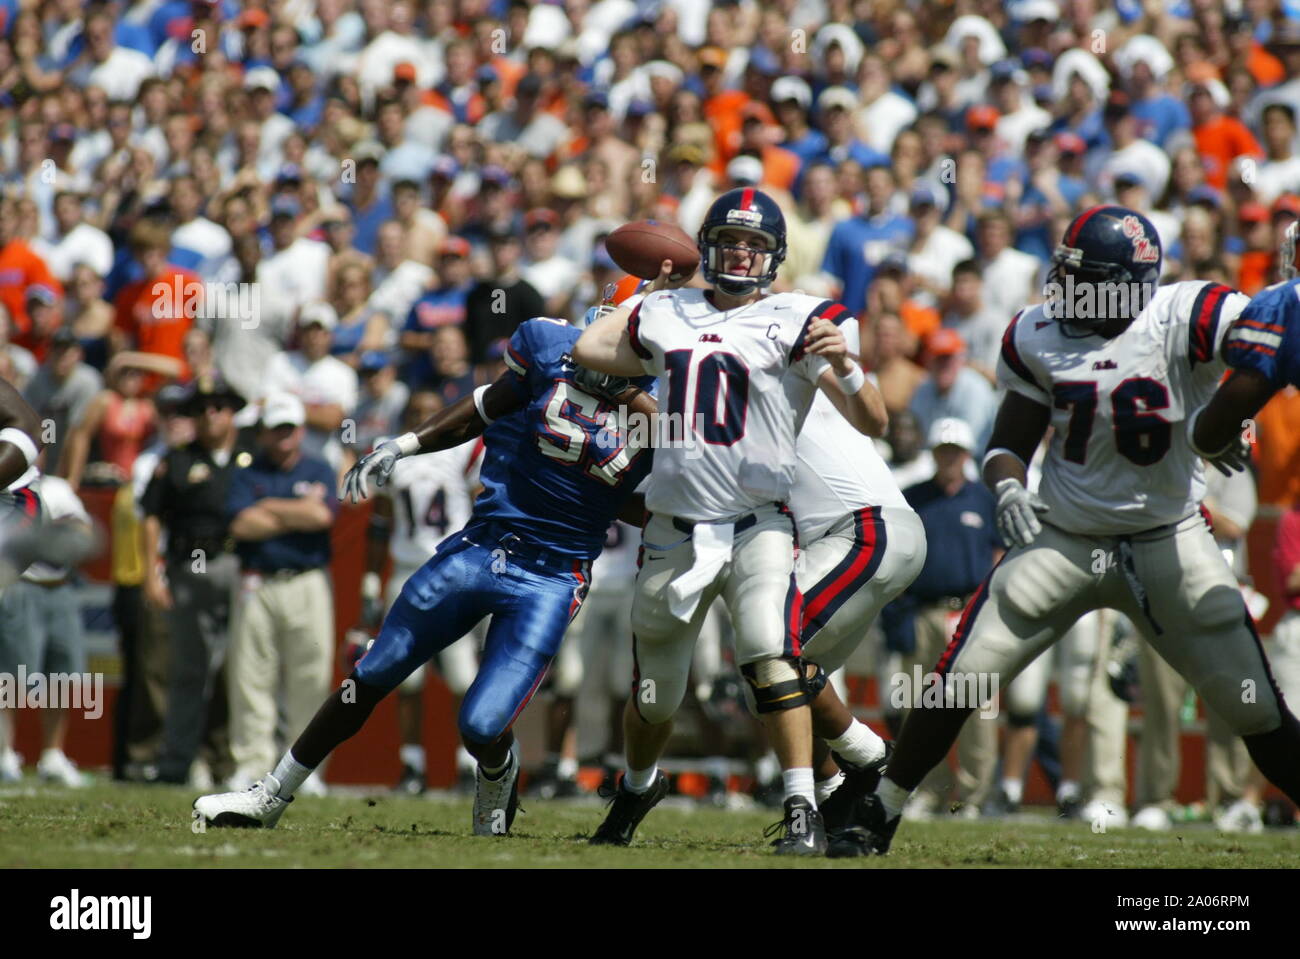 Ole Miss QB Eli Manning drops back to pass during the Rebels' 20-17 victory over the 24th ranked Gators at Ben Hill Griffen Stadium in Gainesville, Florida. Stock Photo